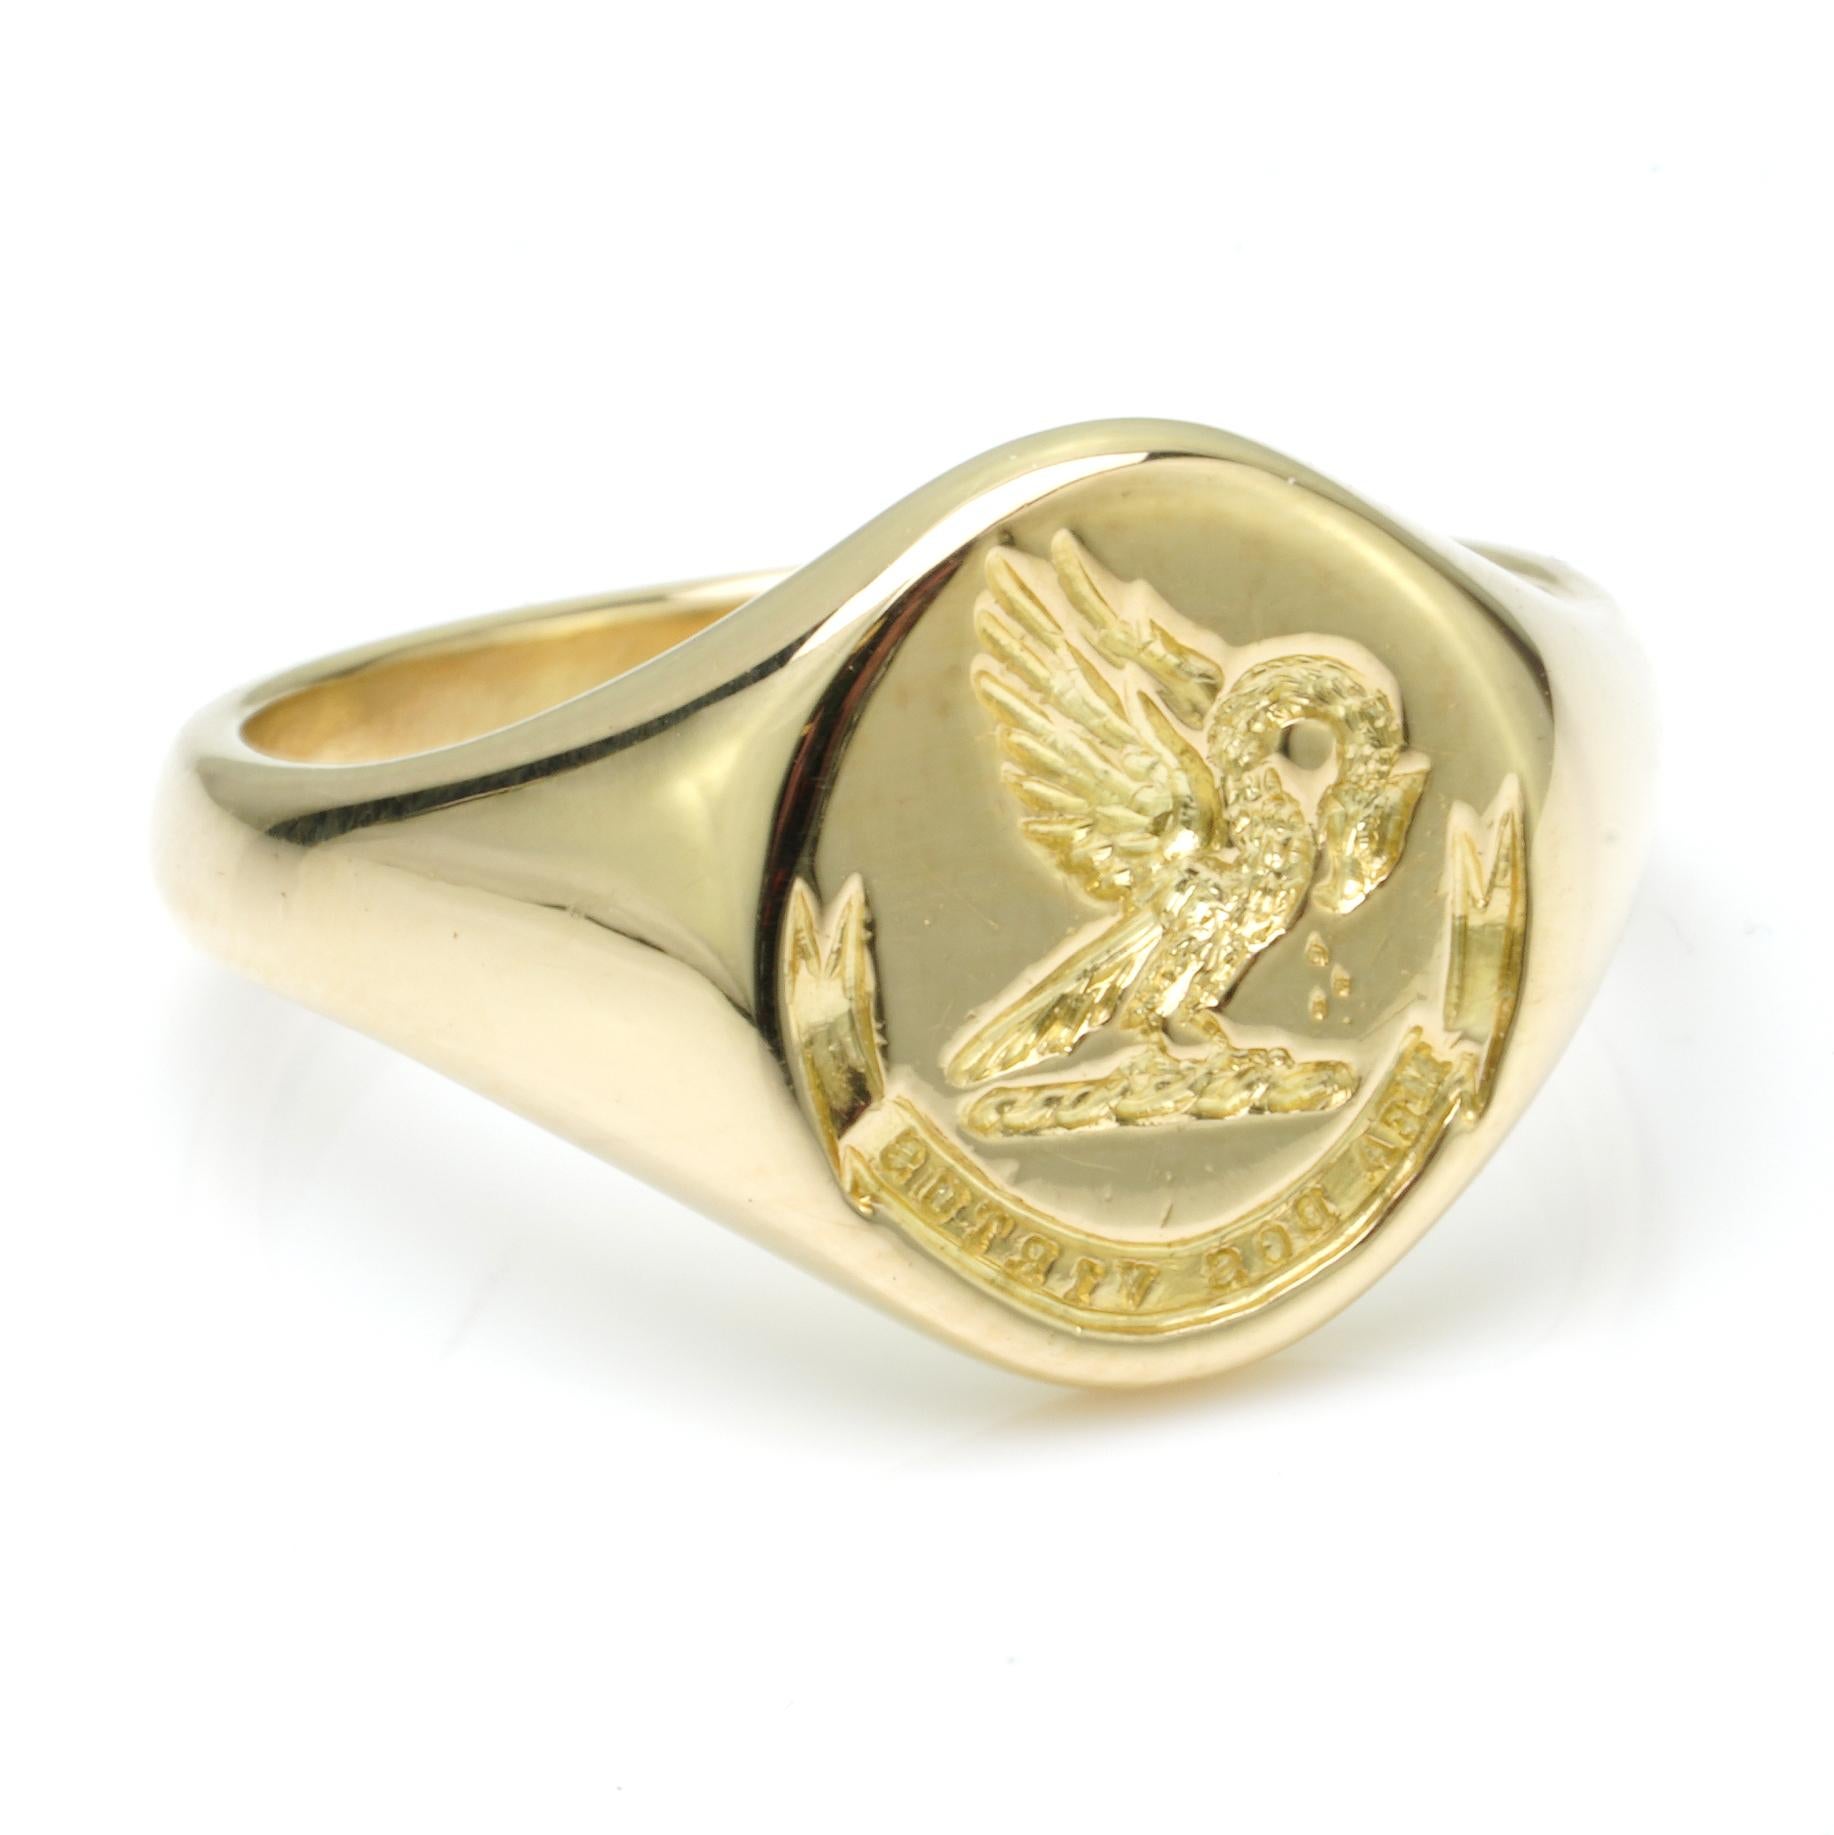 Women's or Men's 18t. yellow gold men's Signet Ring with Dragon and Latin Phrase Mea Dos Virtus